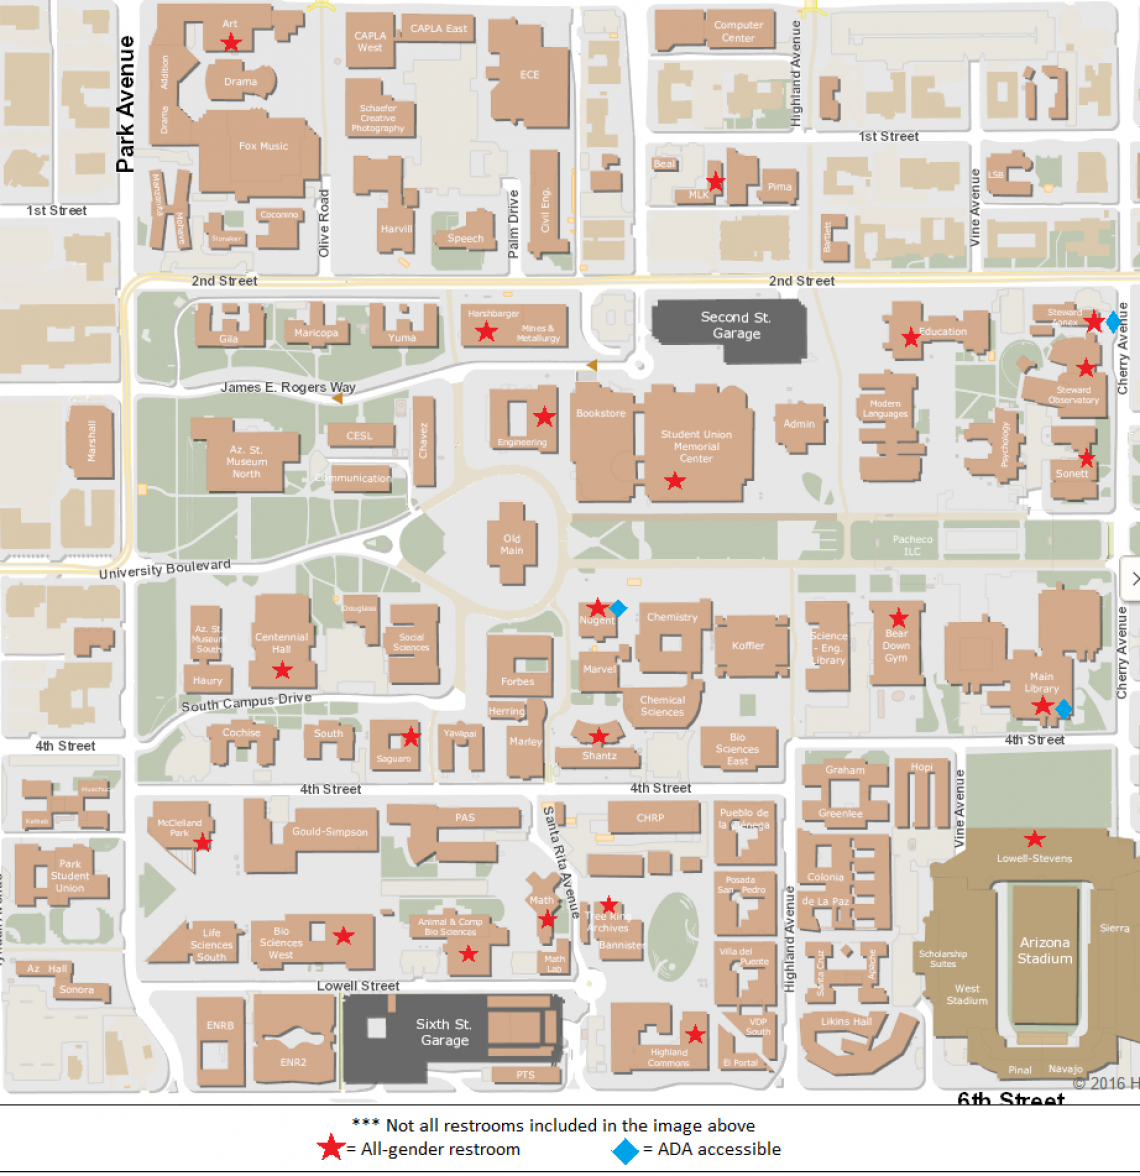 Campus Map of All Gender Bathrooms